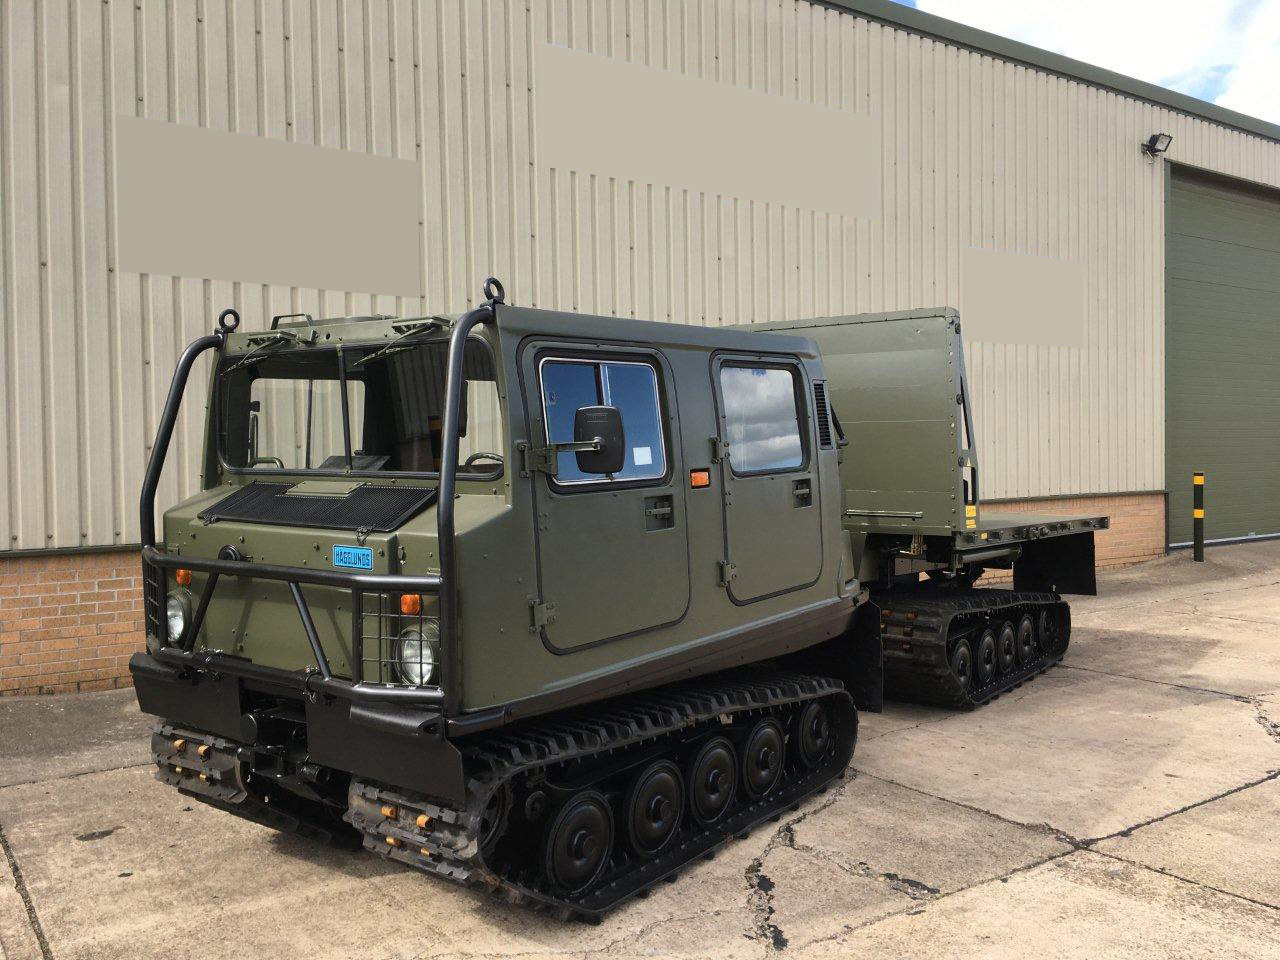 Hagglunds Bv206 Load Carrier with Crane - ex military vehicles for sale, mod surplus